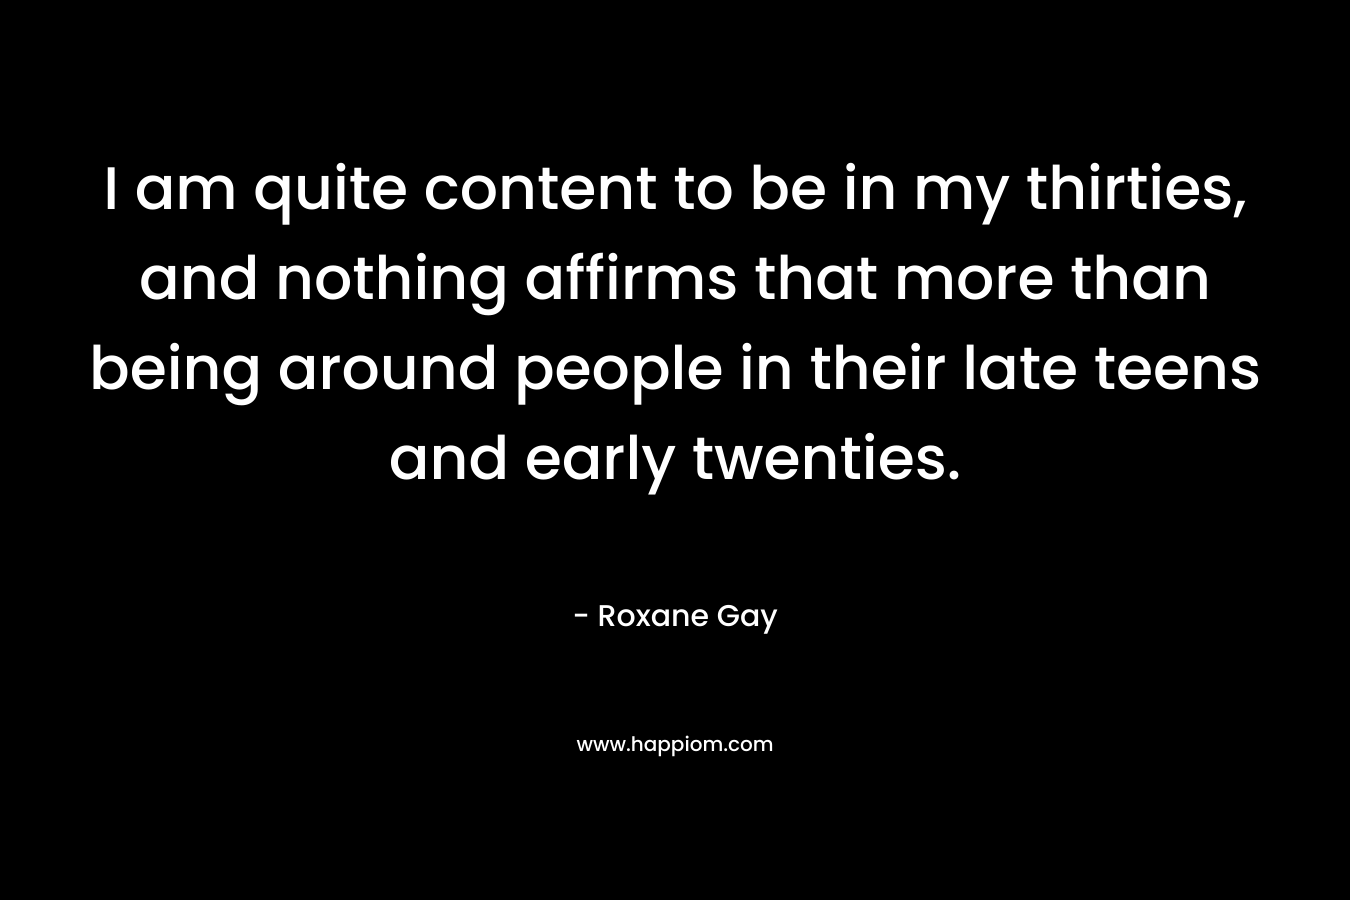 I am quite content to be in my thirties, and nothing affirms that more than being around people in their late teens and early twenties. – Roxane Gay